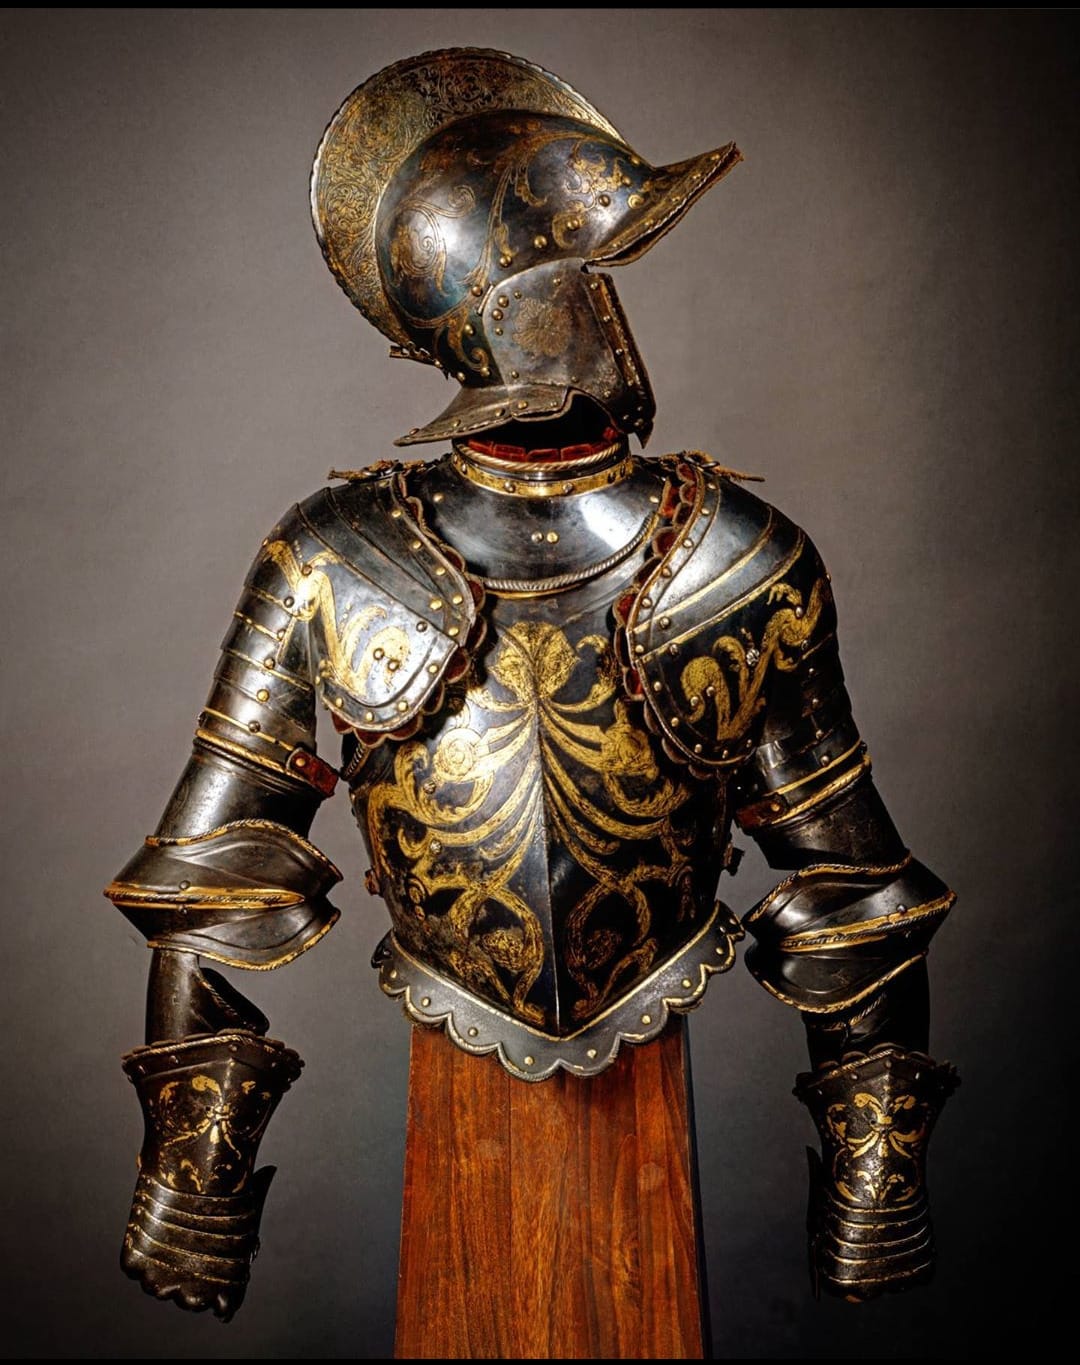 A half-armor of a Vatican Papal Guardsman, Brescia, Italy, ca. 1590, housed at the Museo Stibberto.